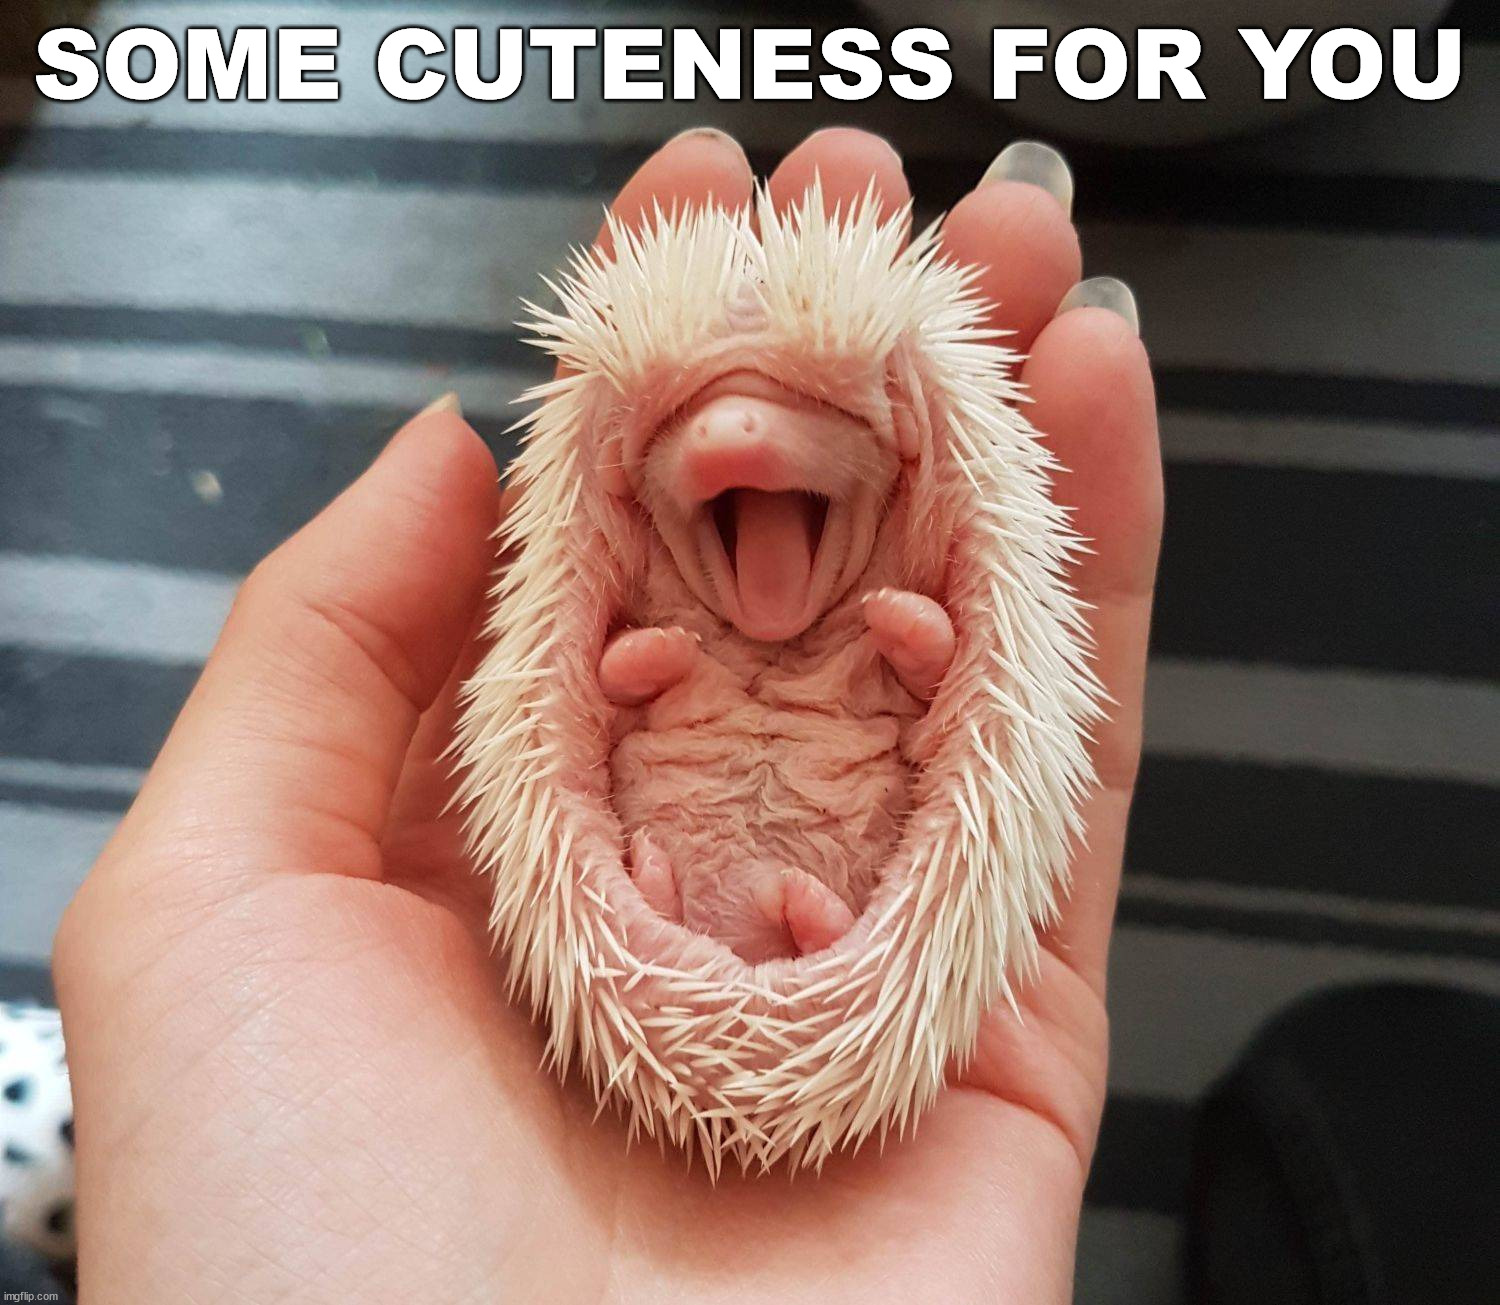 SOME CUTENESS FOR YOU | made w/ Imgflip meme maker